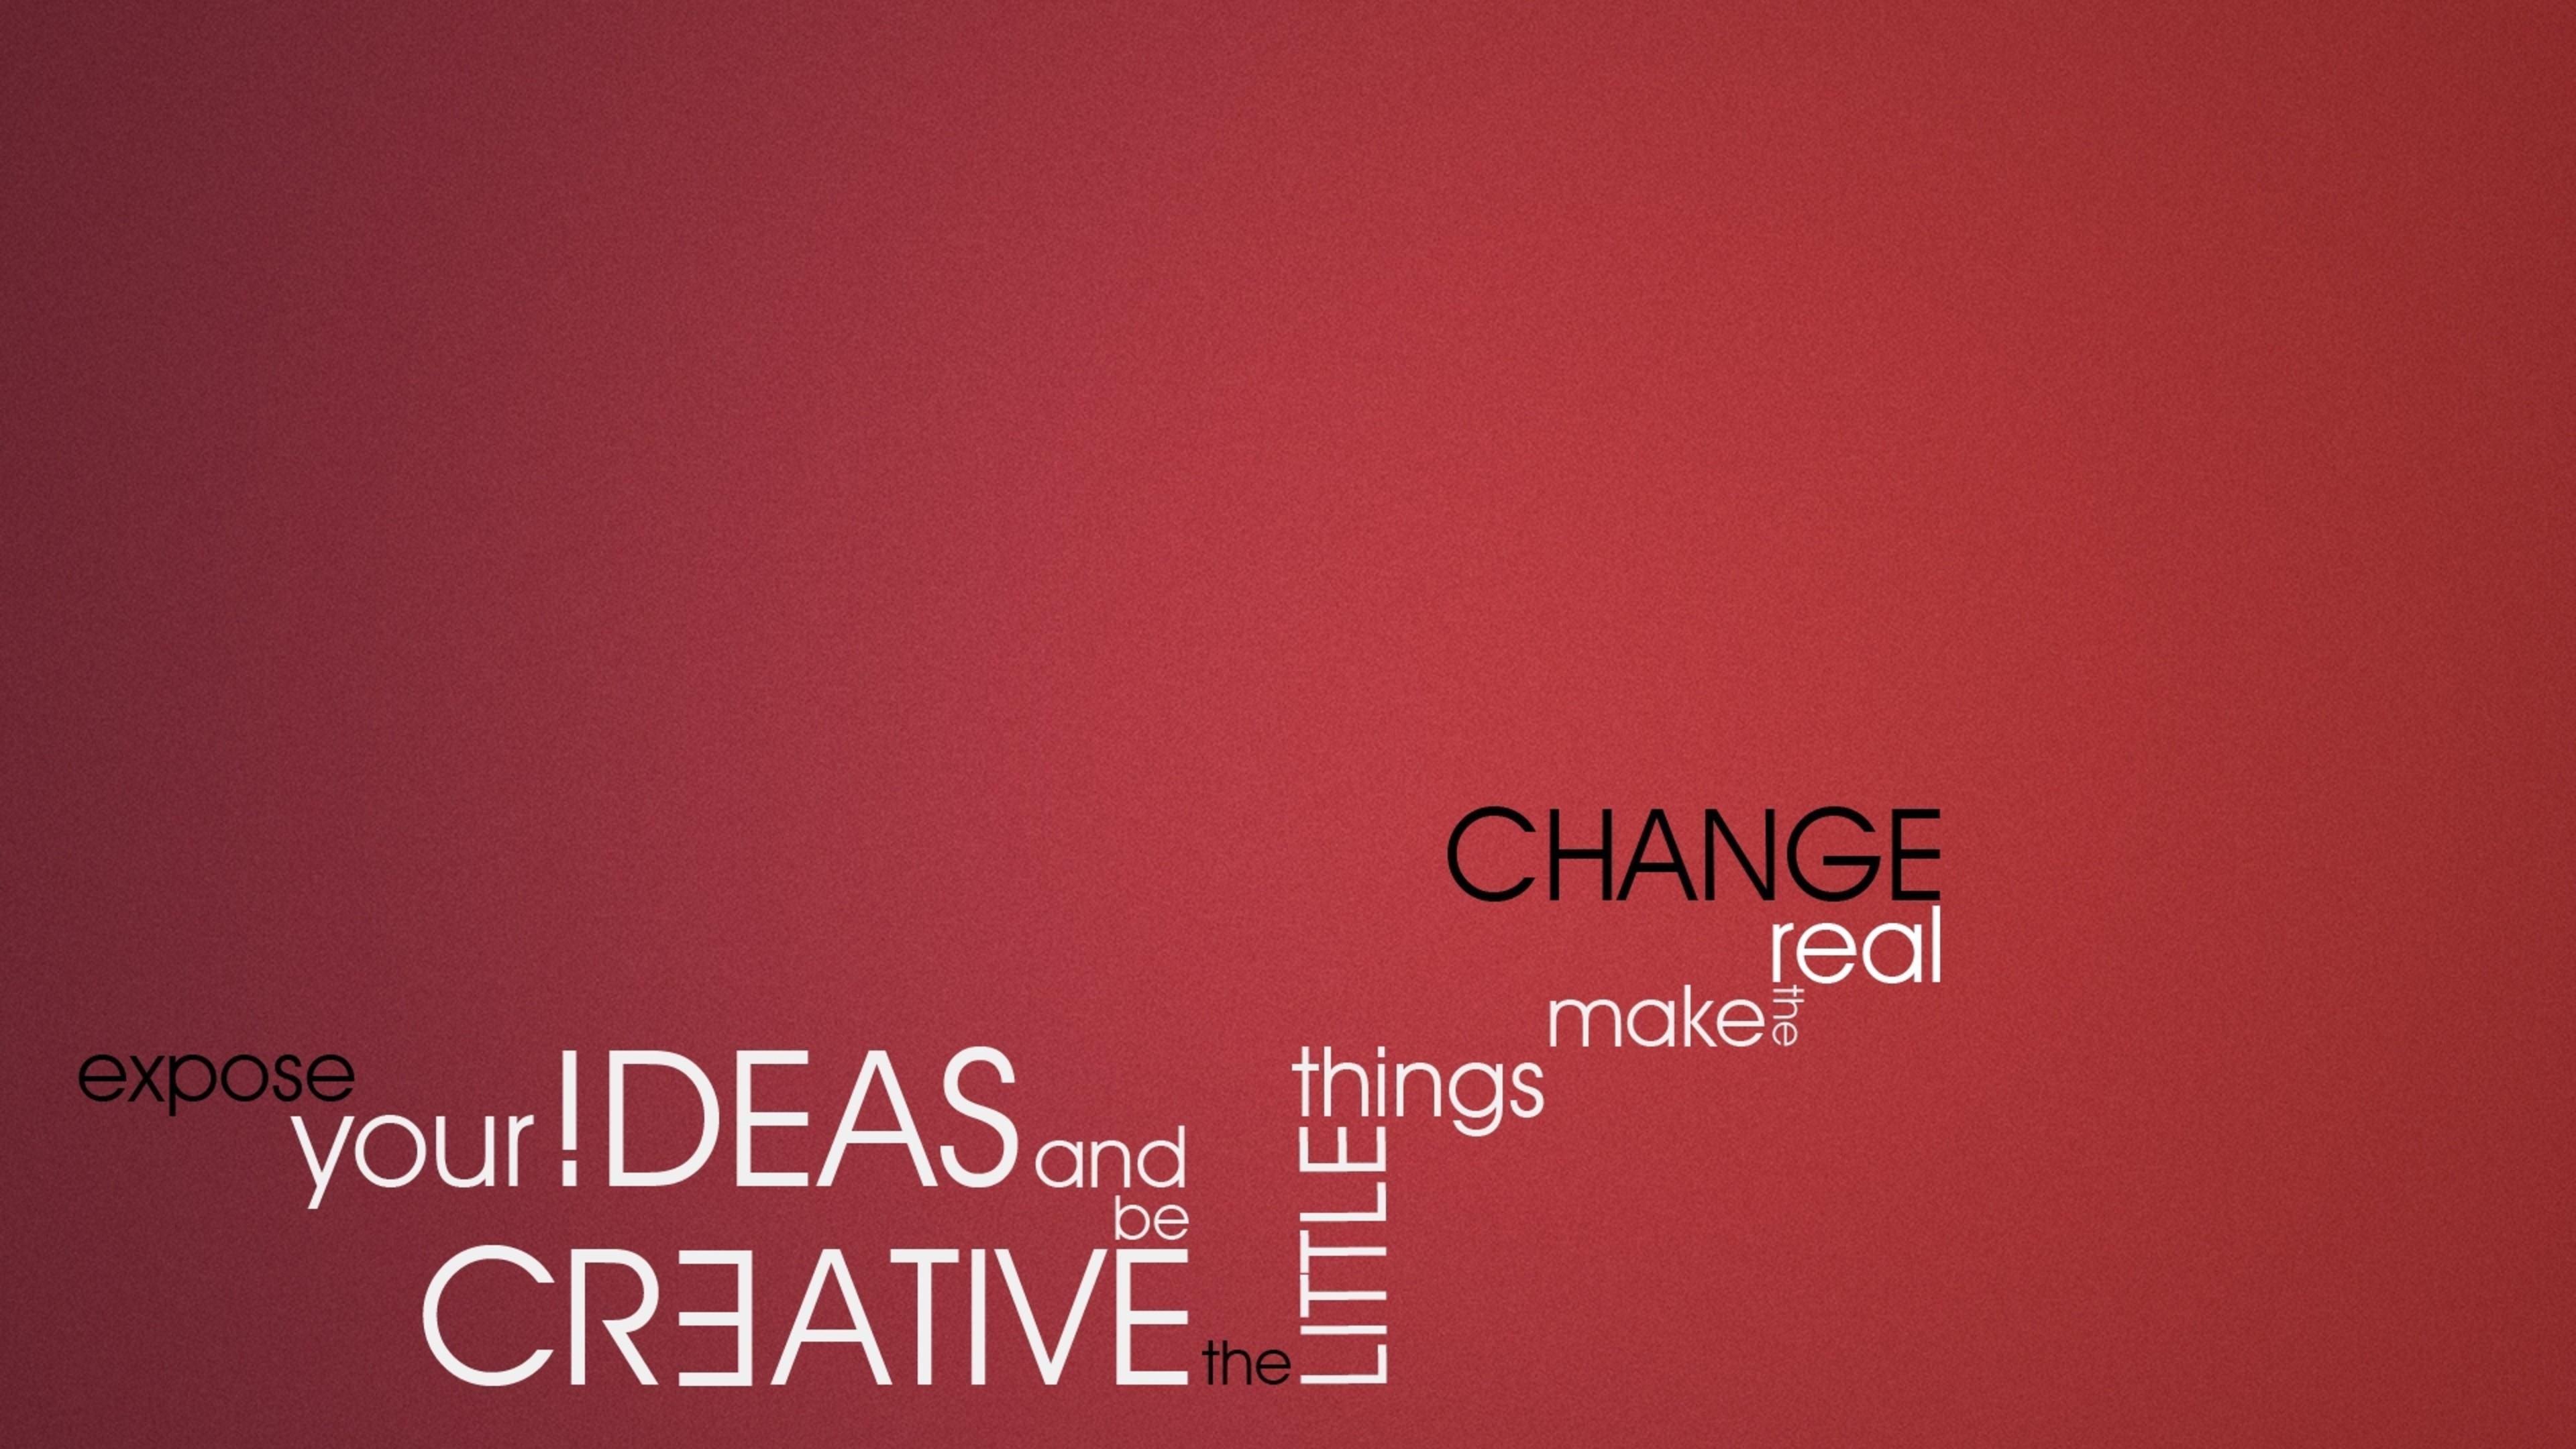 quotes, things, ideas, red, creativ, little, change, real, expose